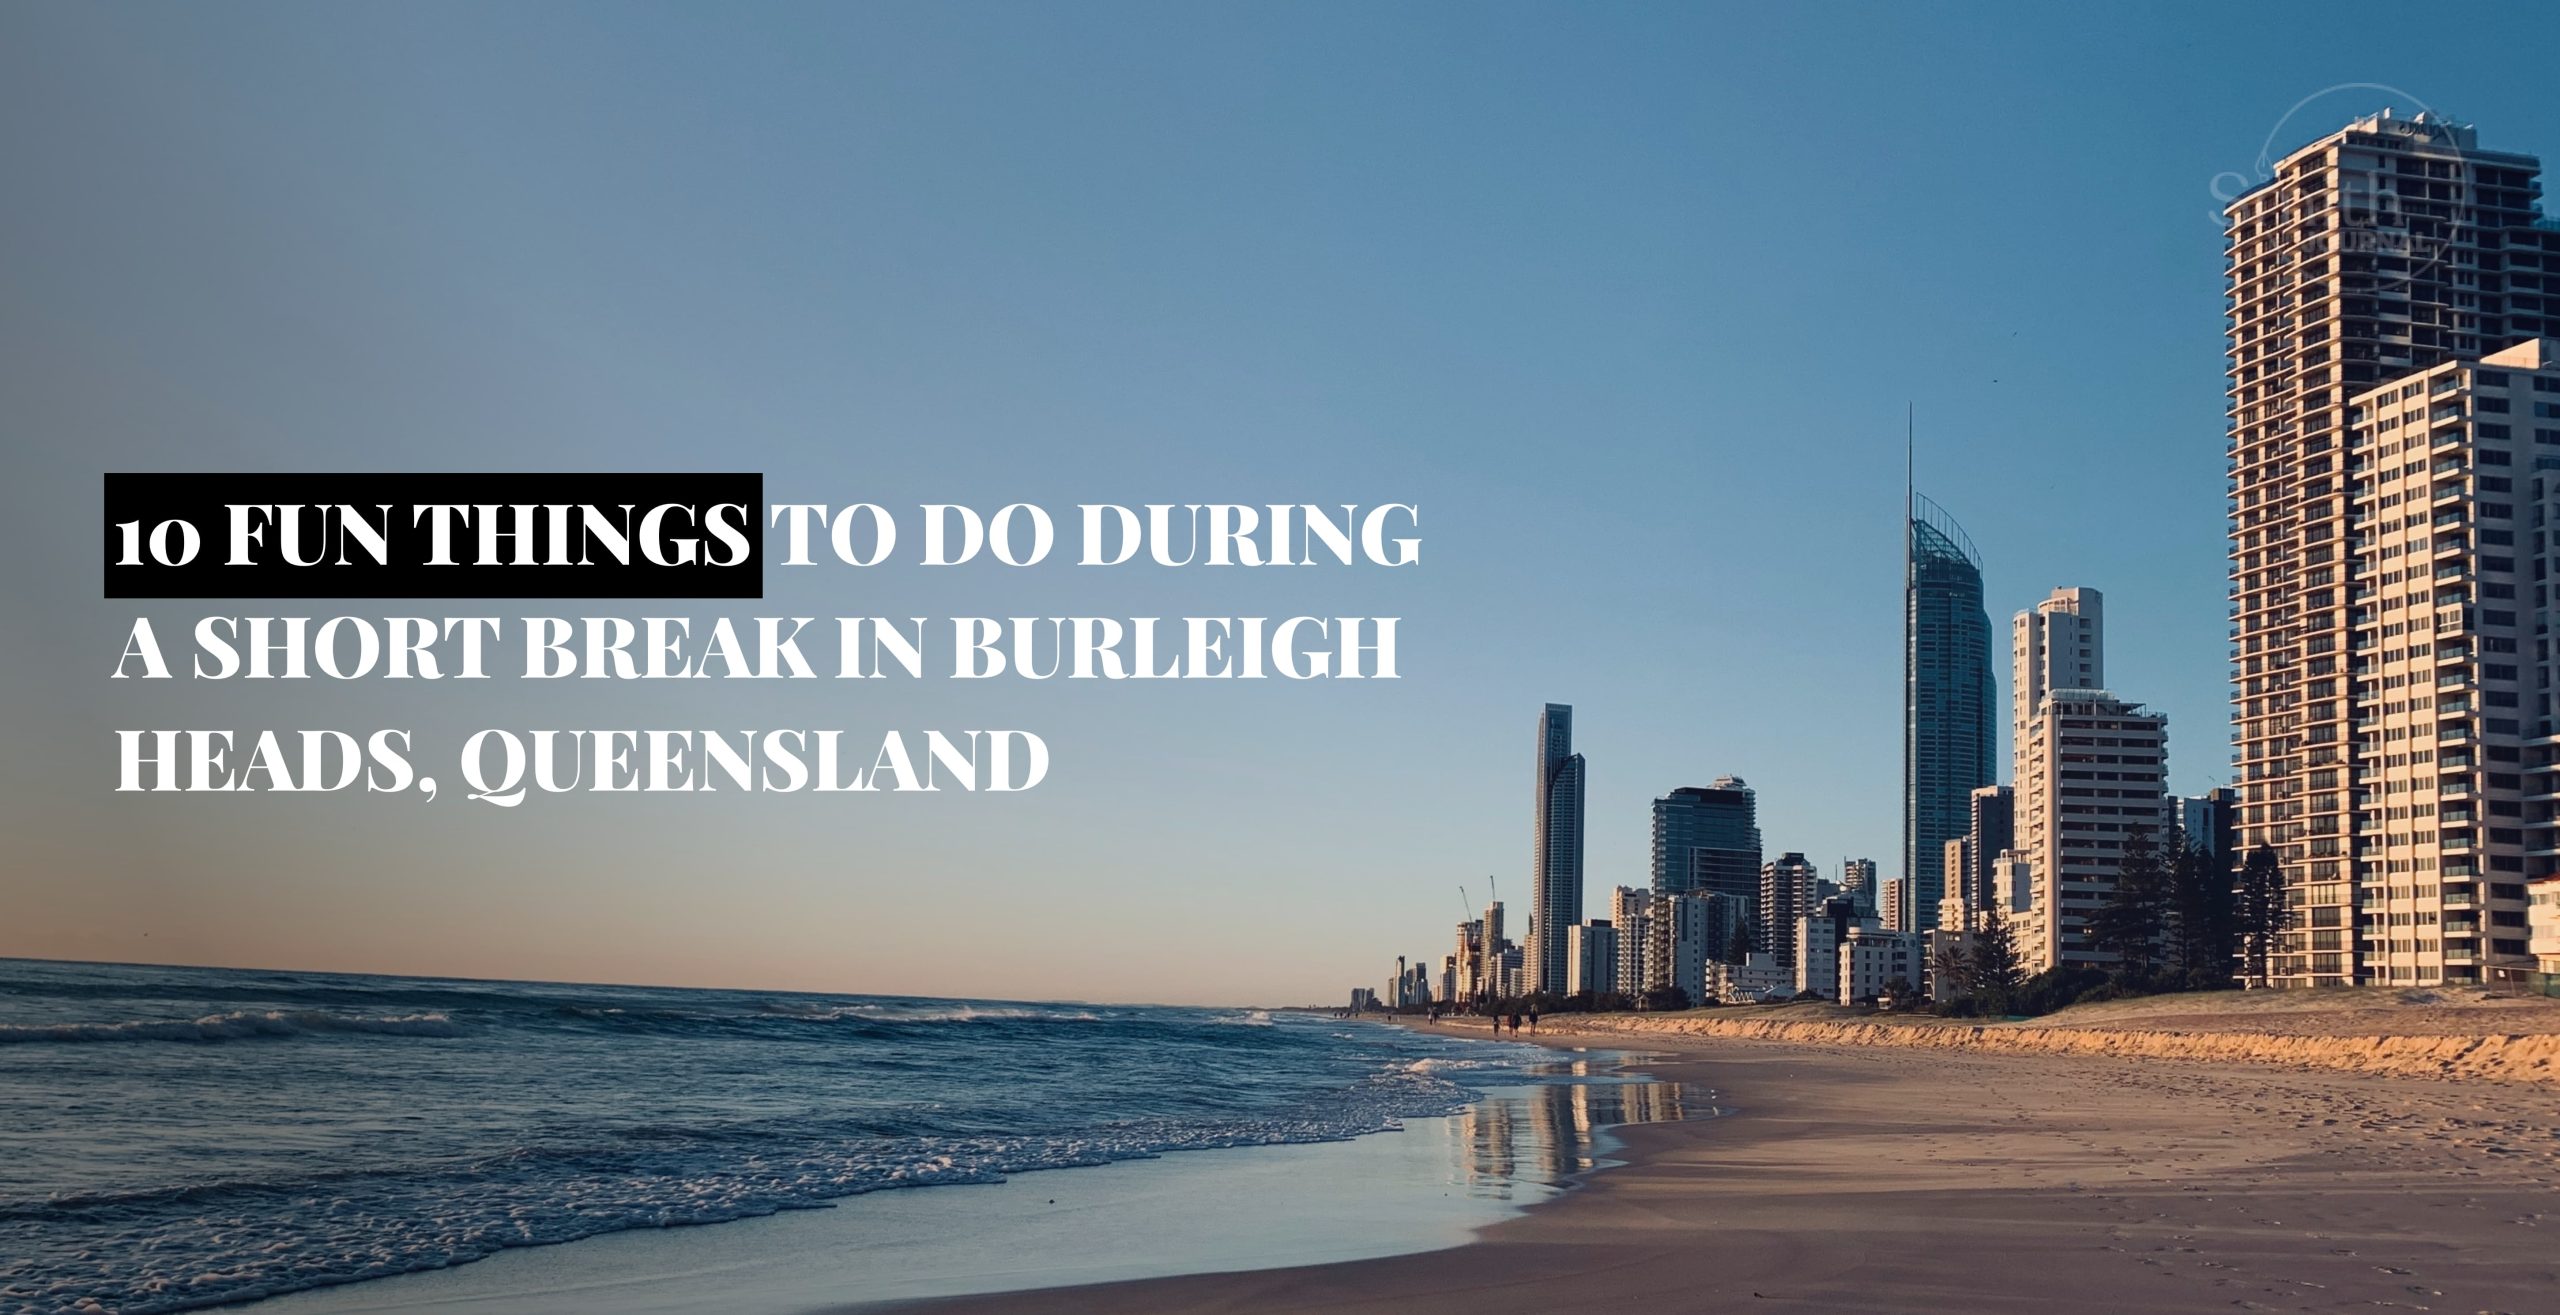 10 Fun things to do during a short break in Burleigh Heads, Queensland